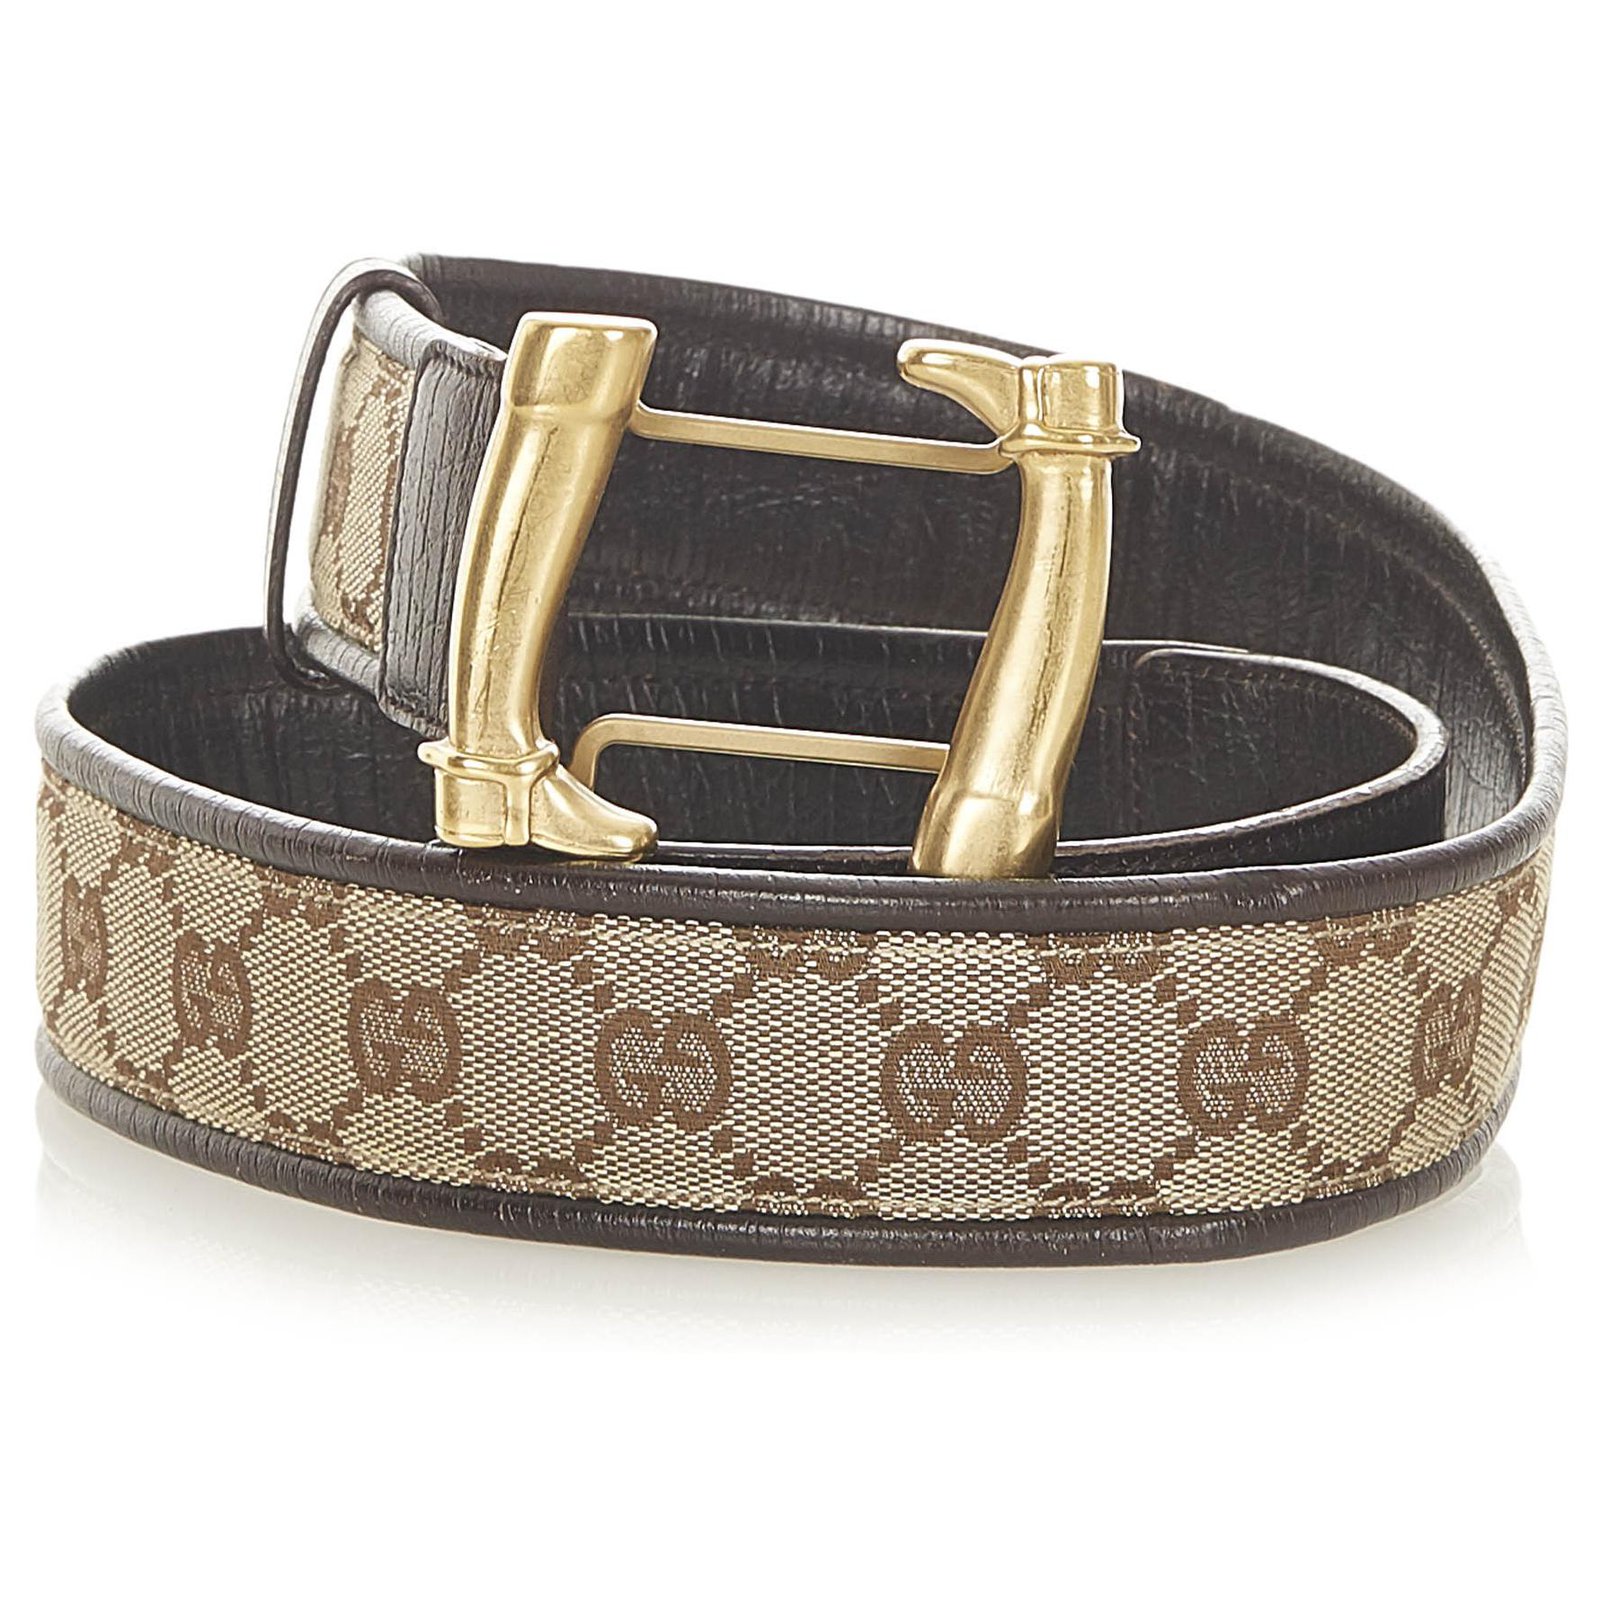 Gucci Brown GG Canvas Belt Beige Golden Leather Cloth Pony-style